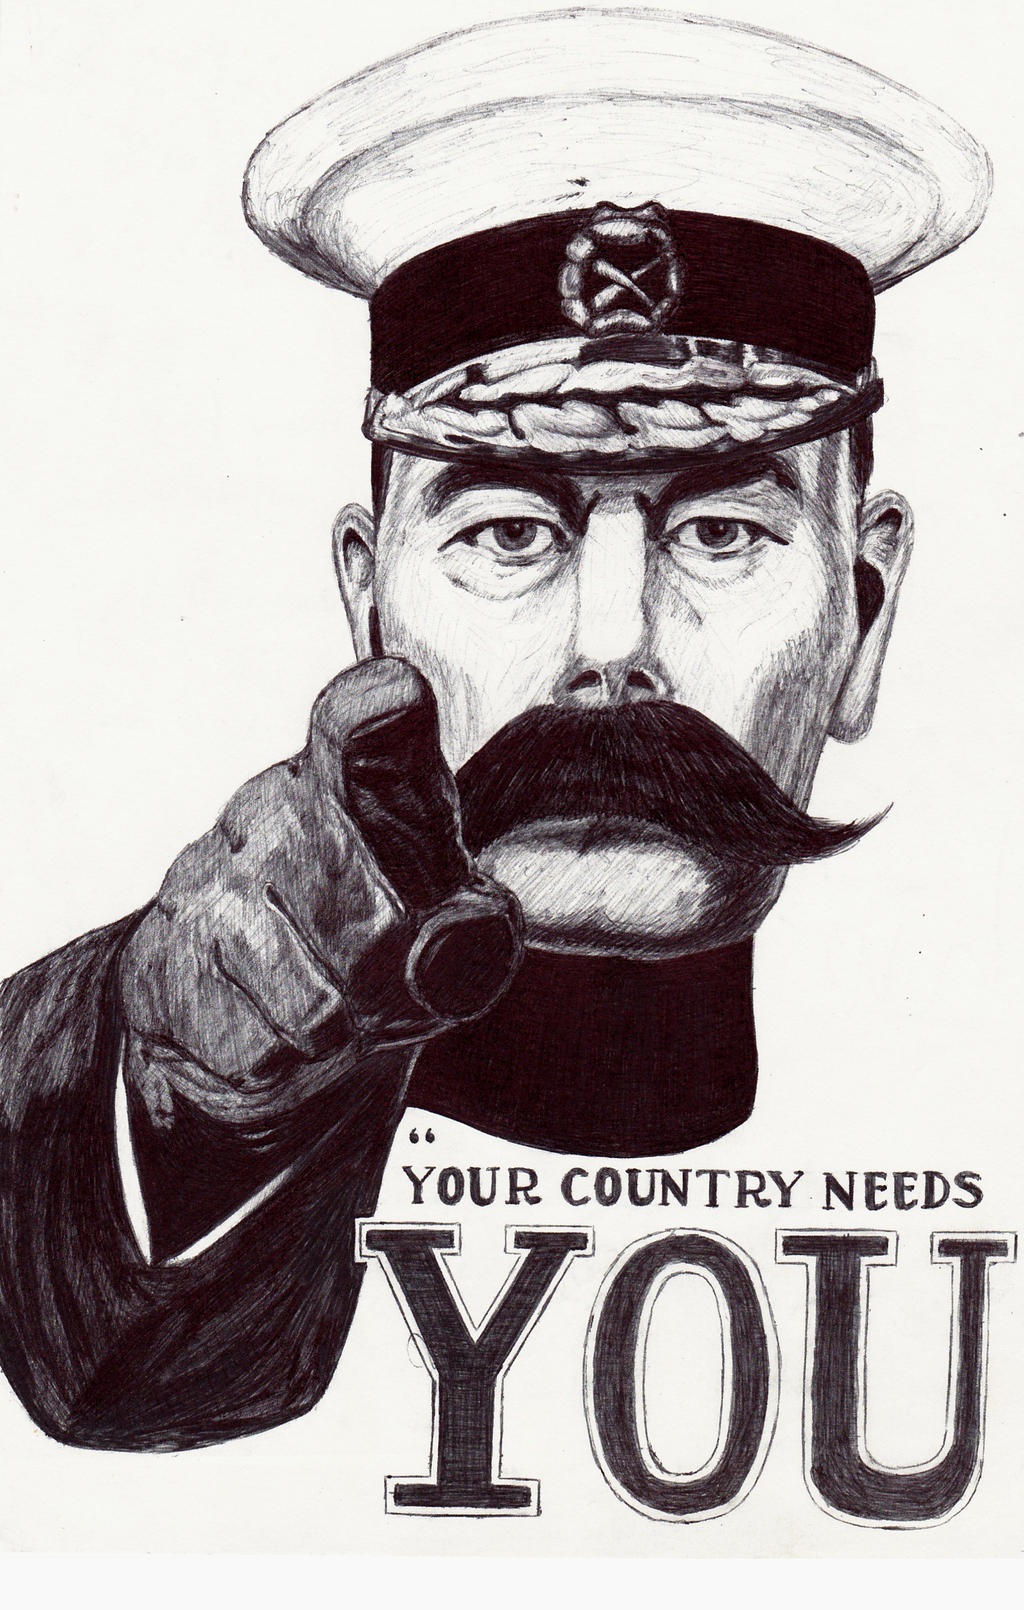 Lord Kitchener Wants You by luisalarconramos on DeviantArt